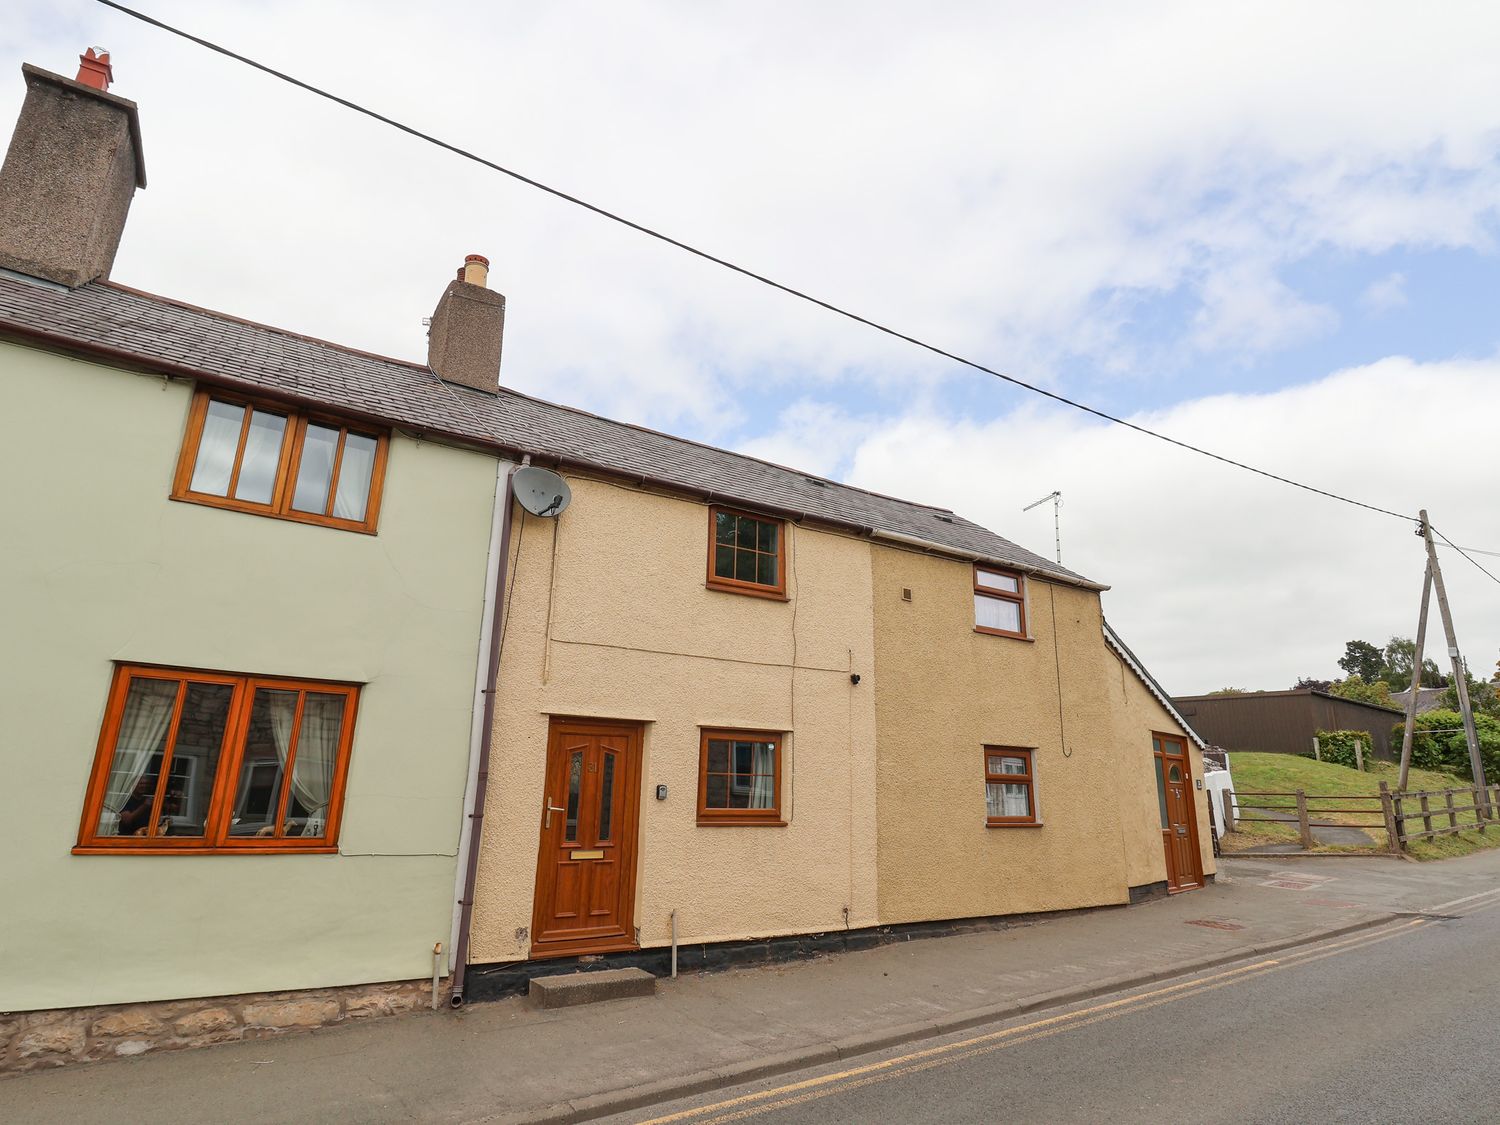 Rhos Street Retreat, Ruthin, Denbighshire. One-bedroom cottage, near AONB, amenities and attractions